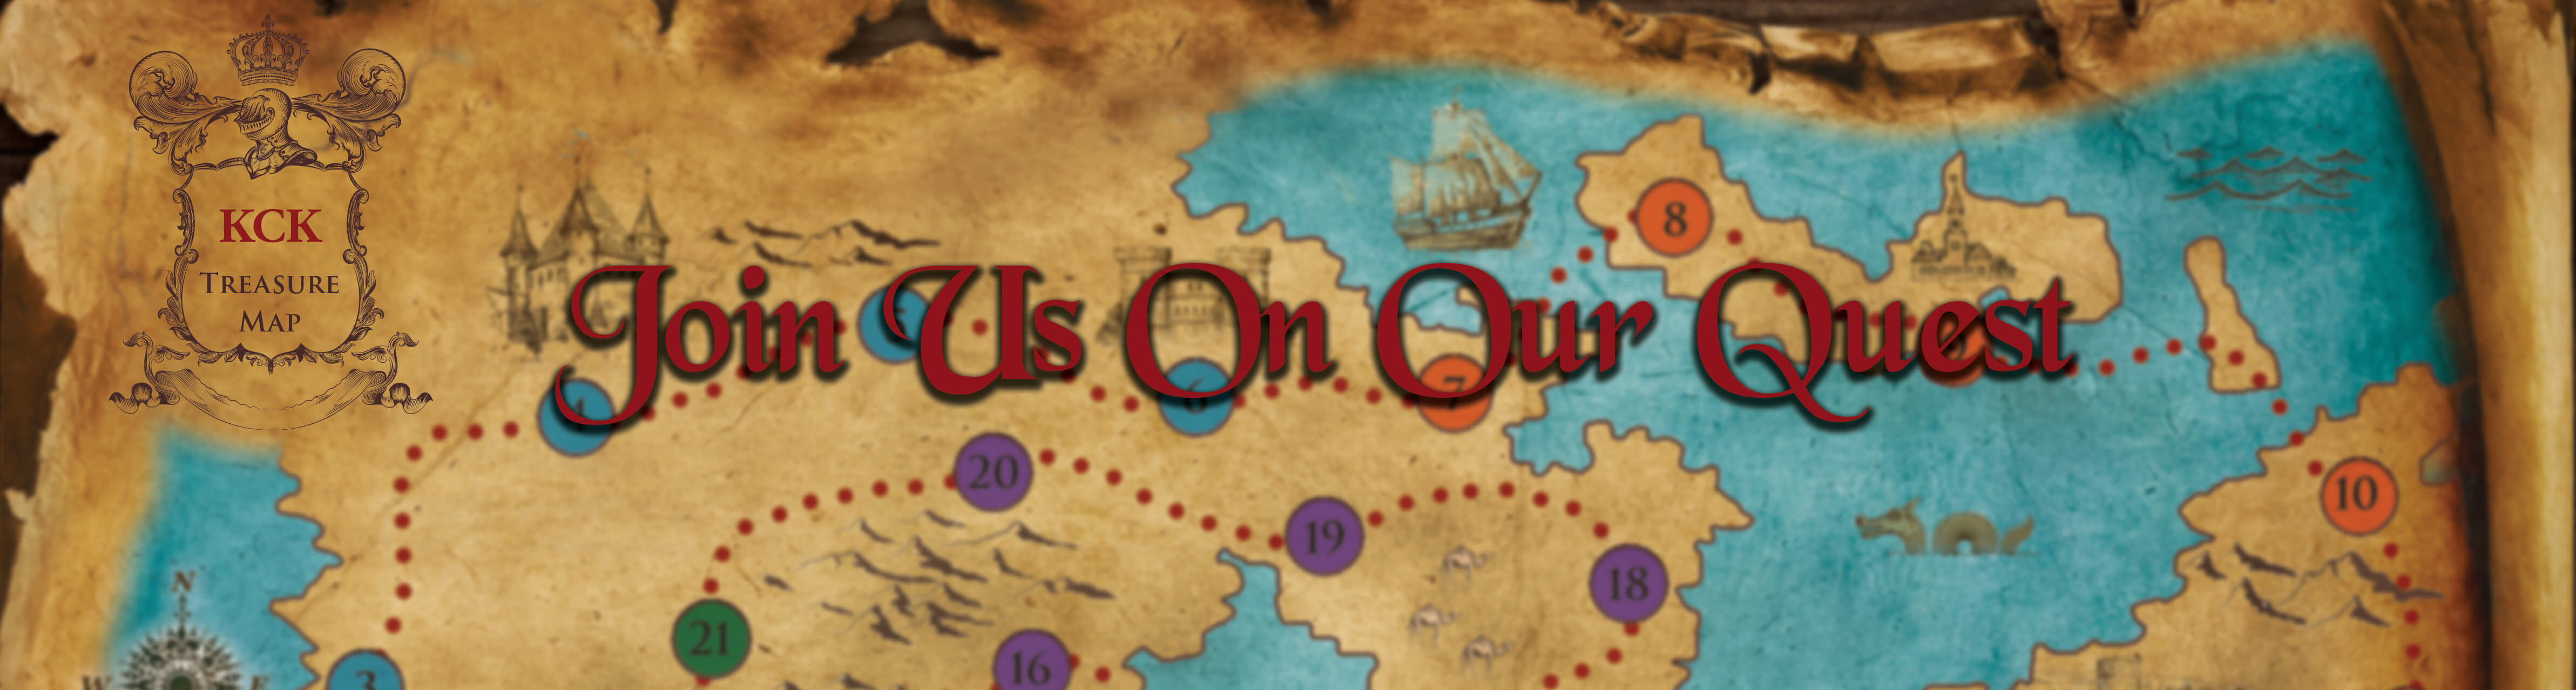 The Kingdom Code quest